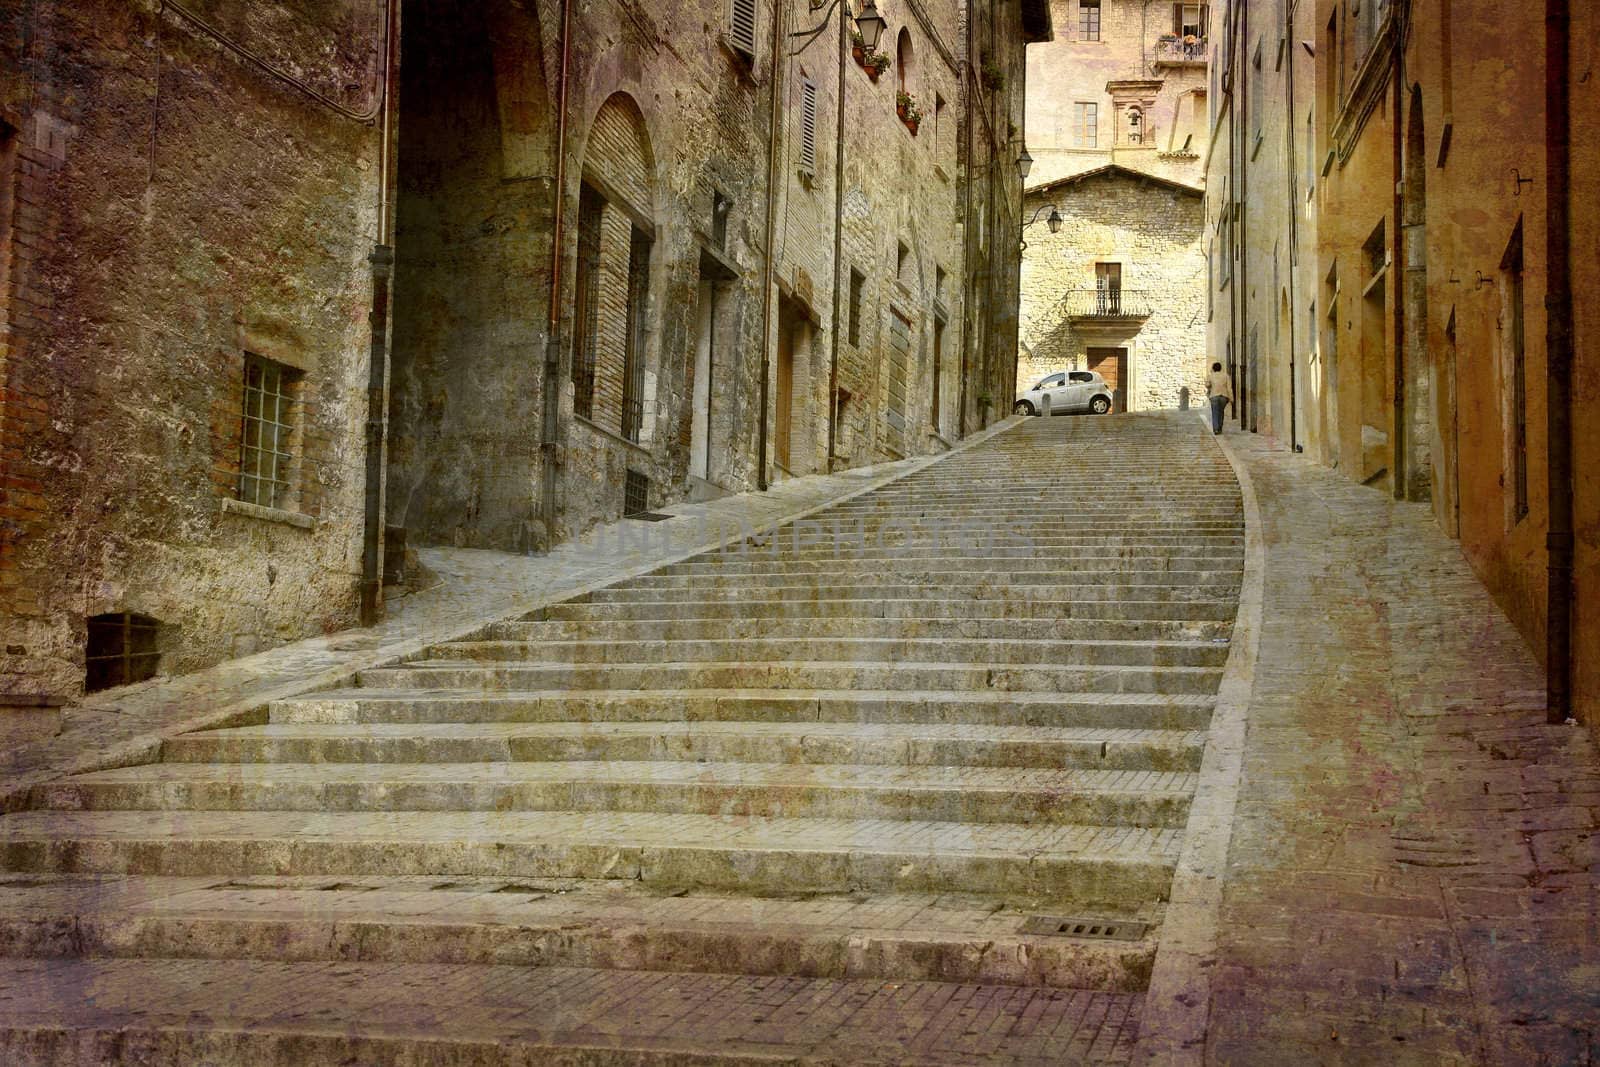 Artistic work of my own in retro style - Postcard from Italy. - Steep alley Gubbio, Umbria, Italy